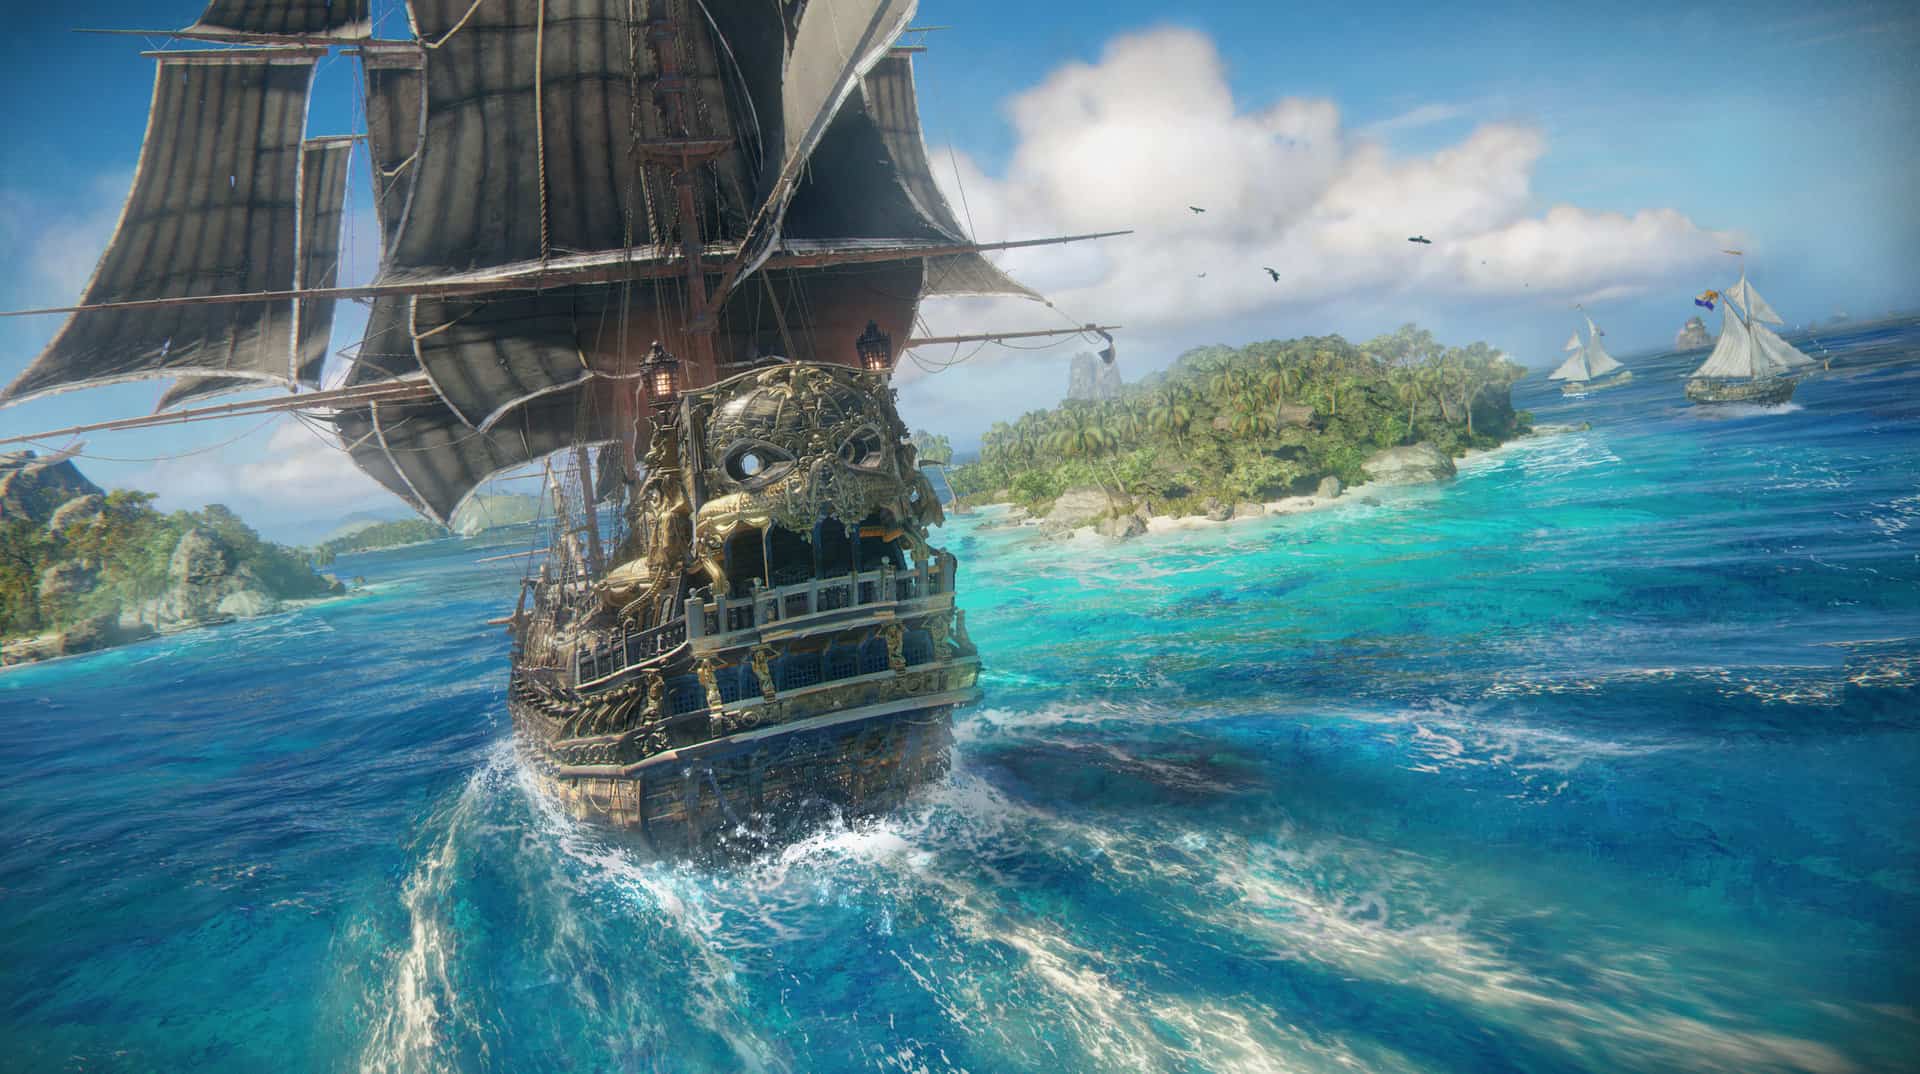 Skull and Bones Coming November 8 - Xbox Wire